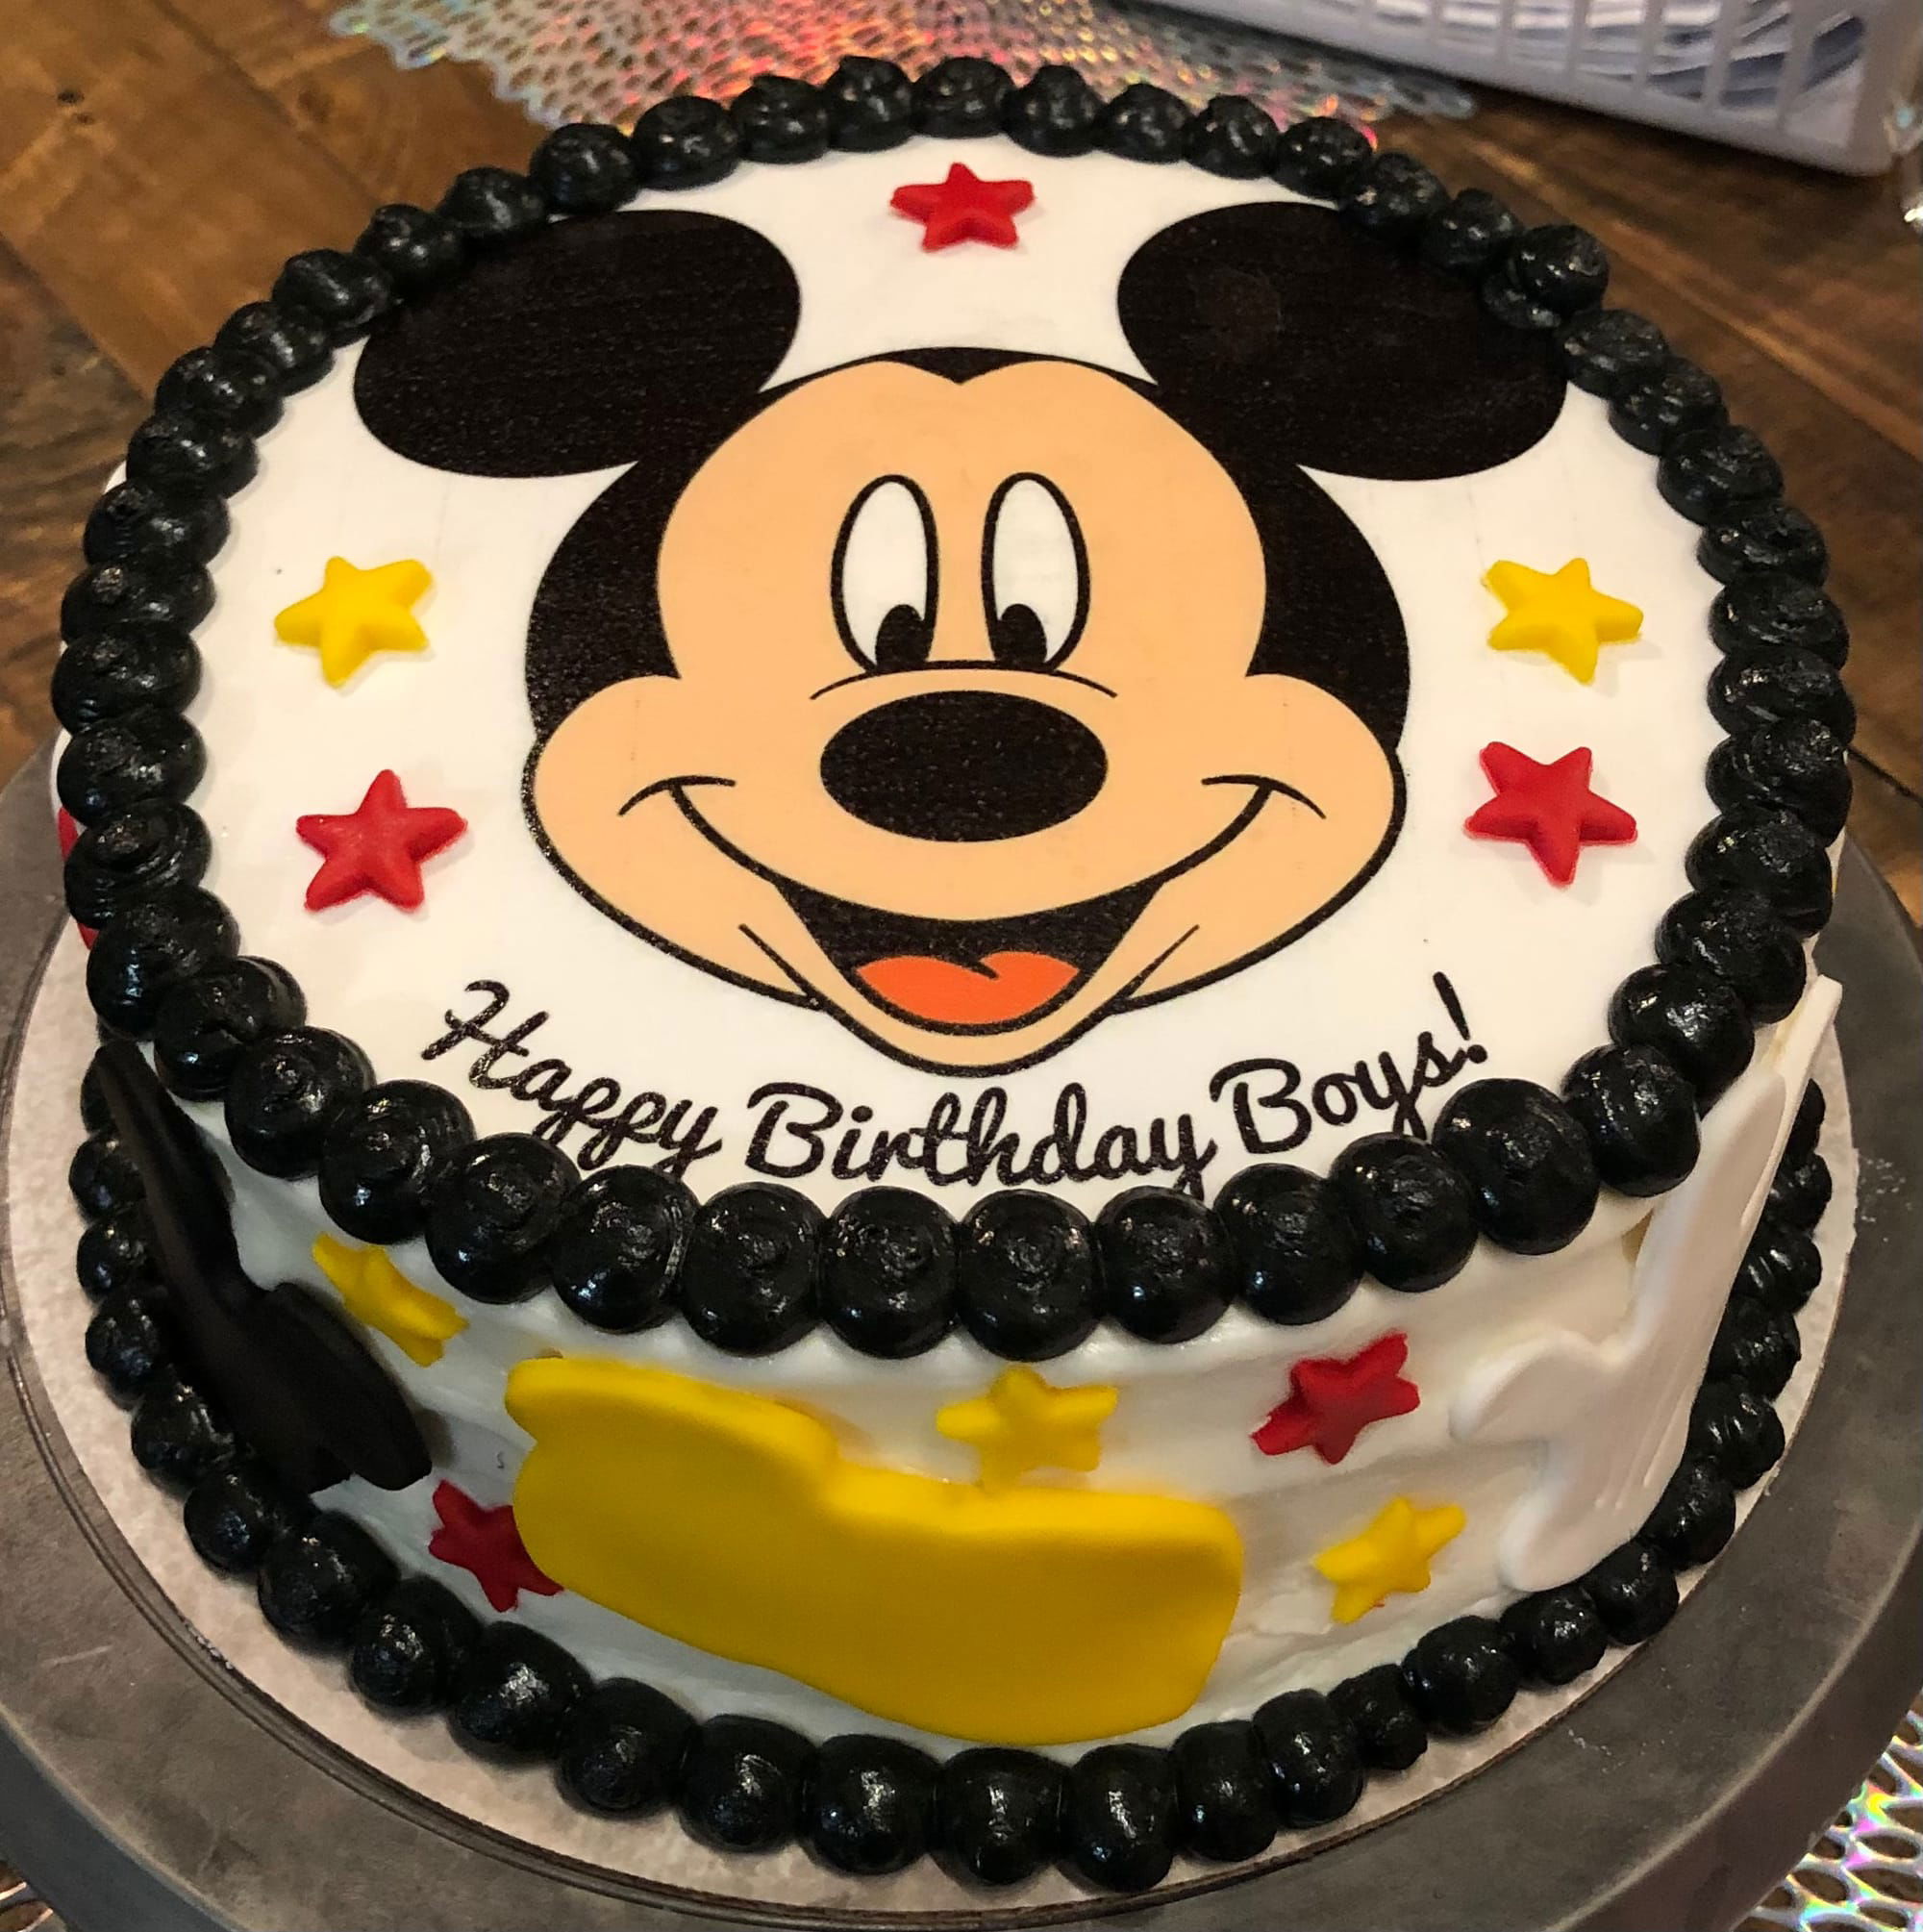 3 Layer Vanilla Mickey Mouse Birthday Cake With Buttercream Frosting & Fondant